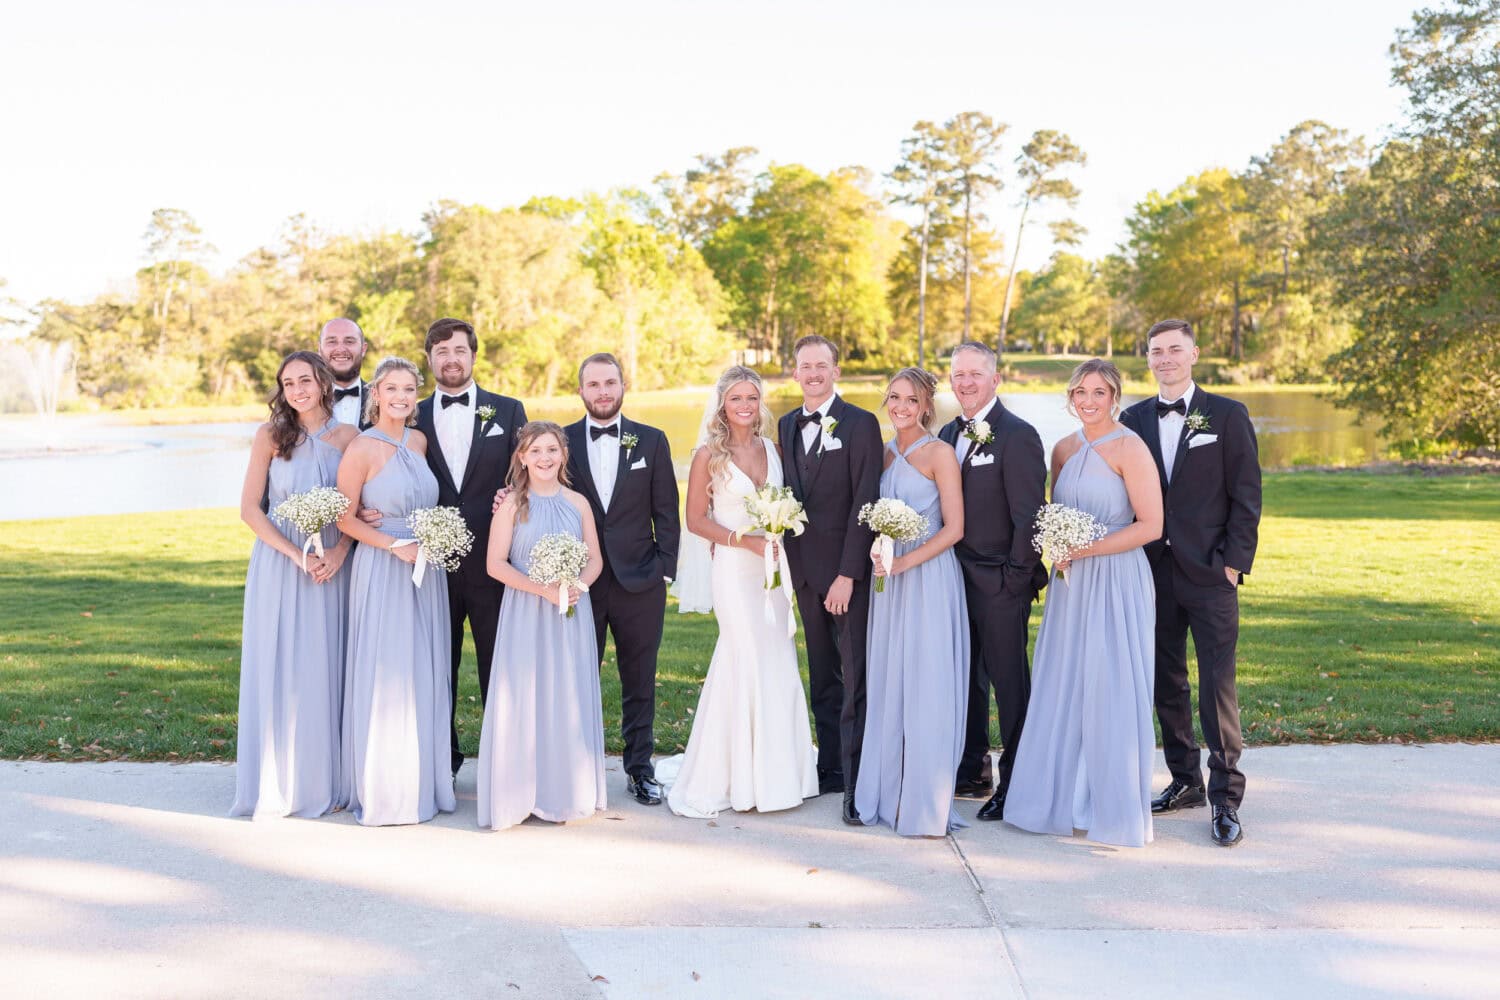 Wedding party in the shade by the lake - Pawleys Plantation